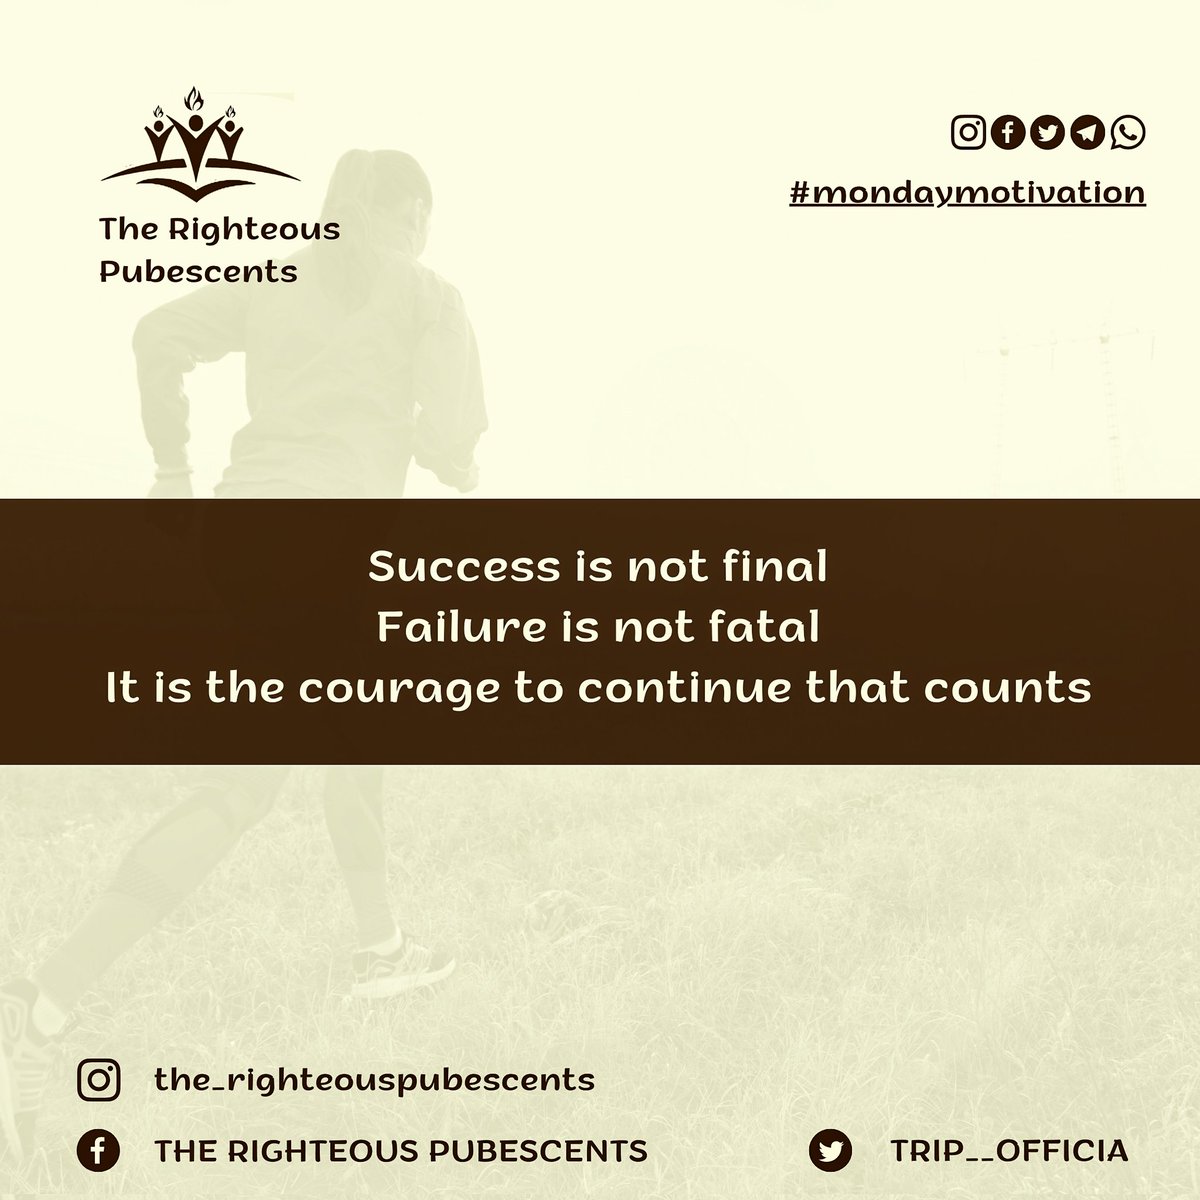 Don't give up. You will soon get there ✨.
#mondaymotivation #therighteouspubescents #gloriousgoldens #glory #weareone #success #dontgiveup #courageousyou #loved